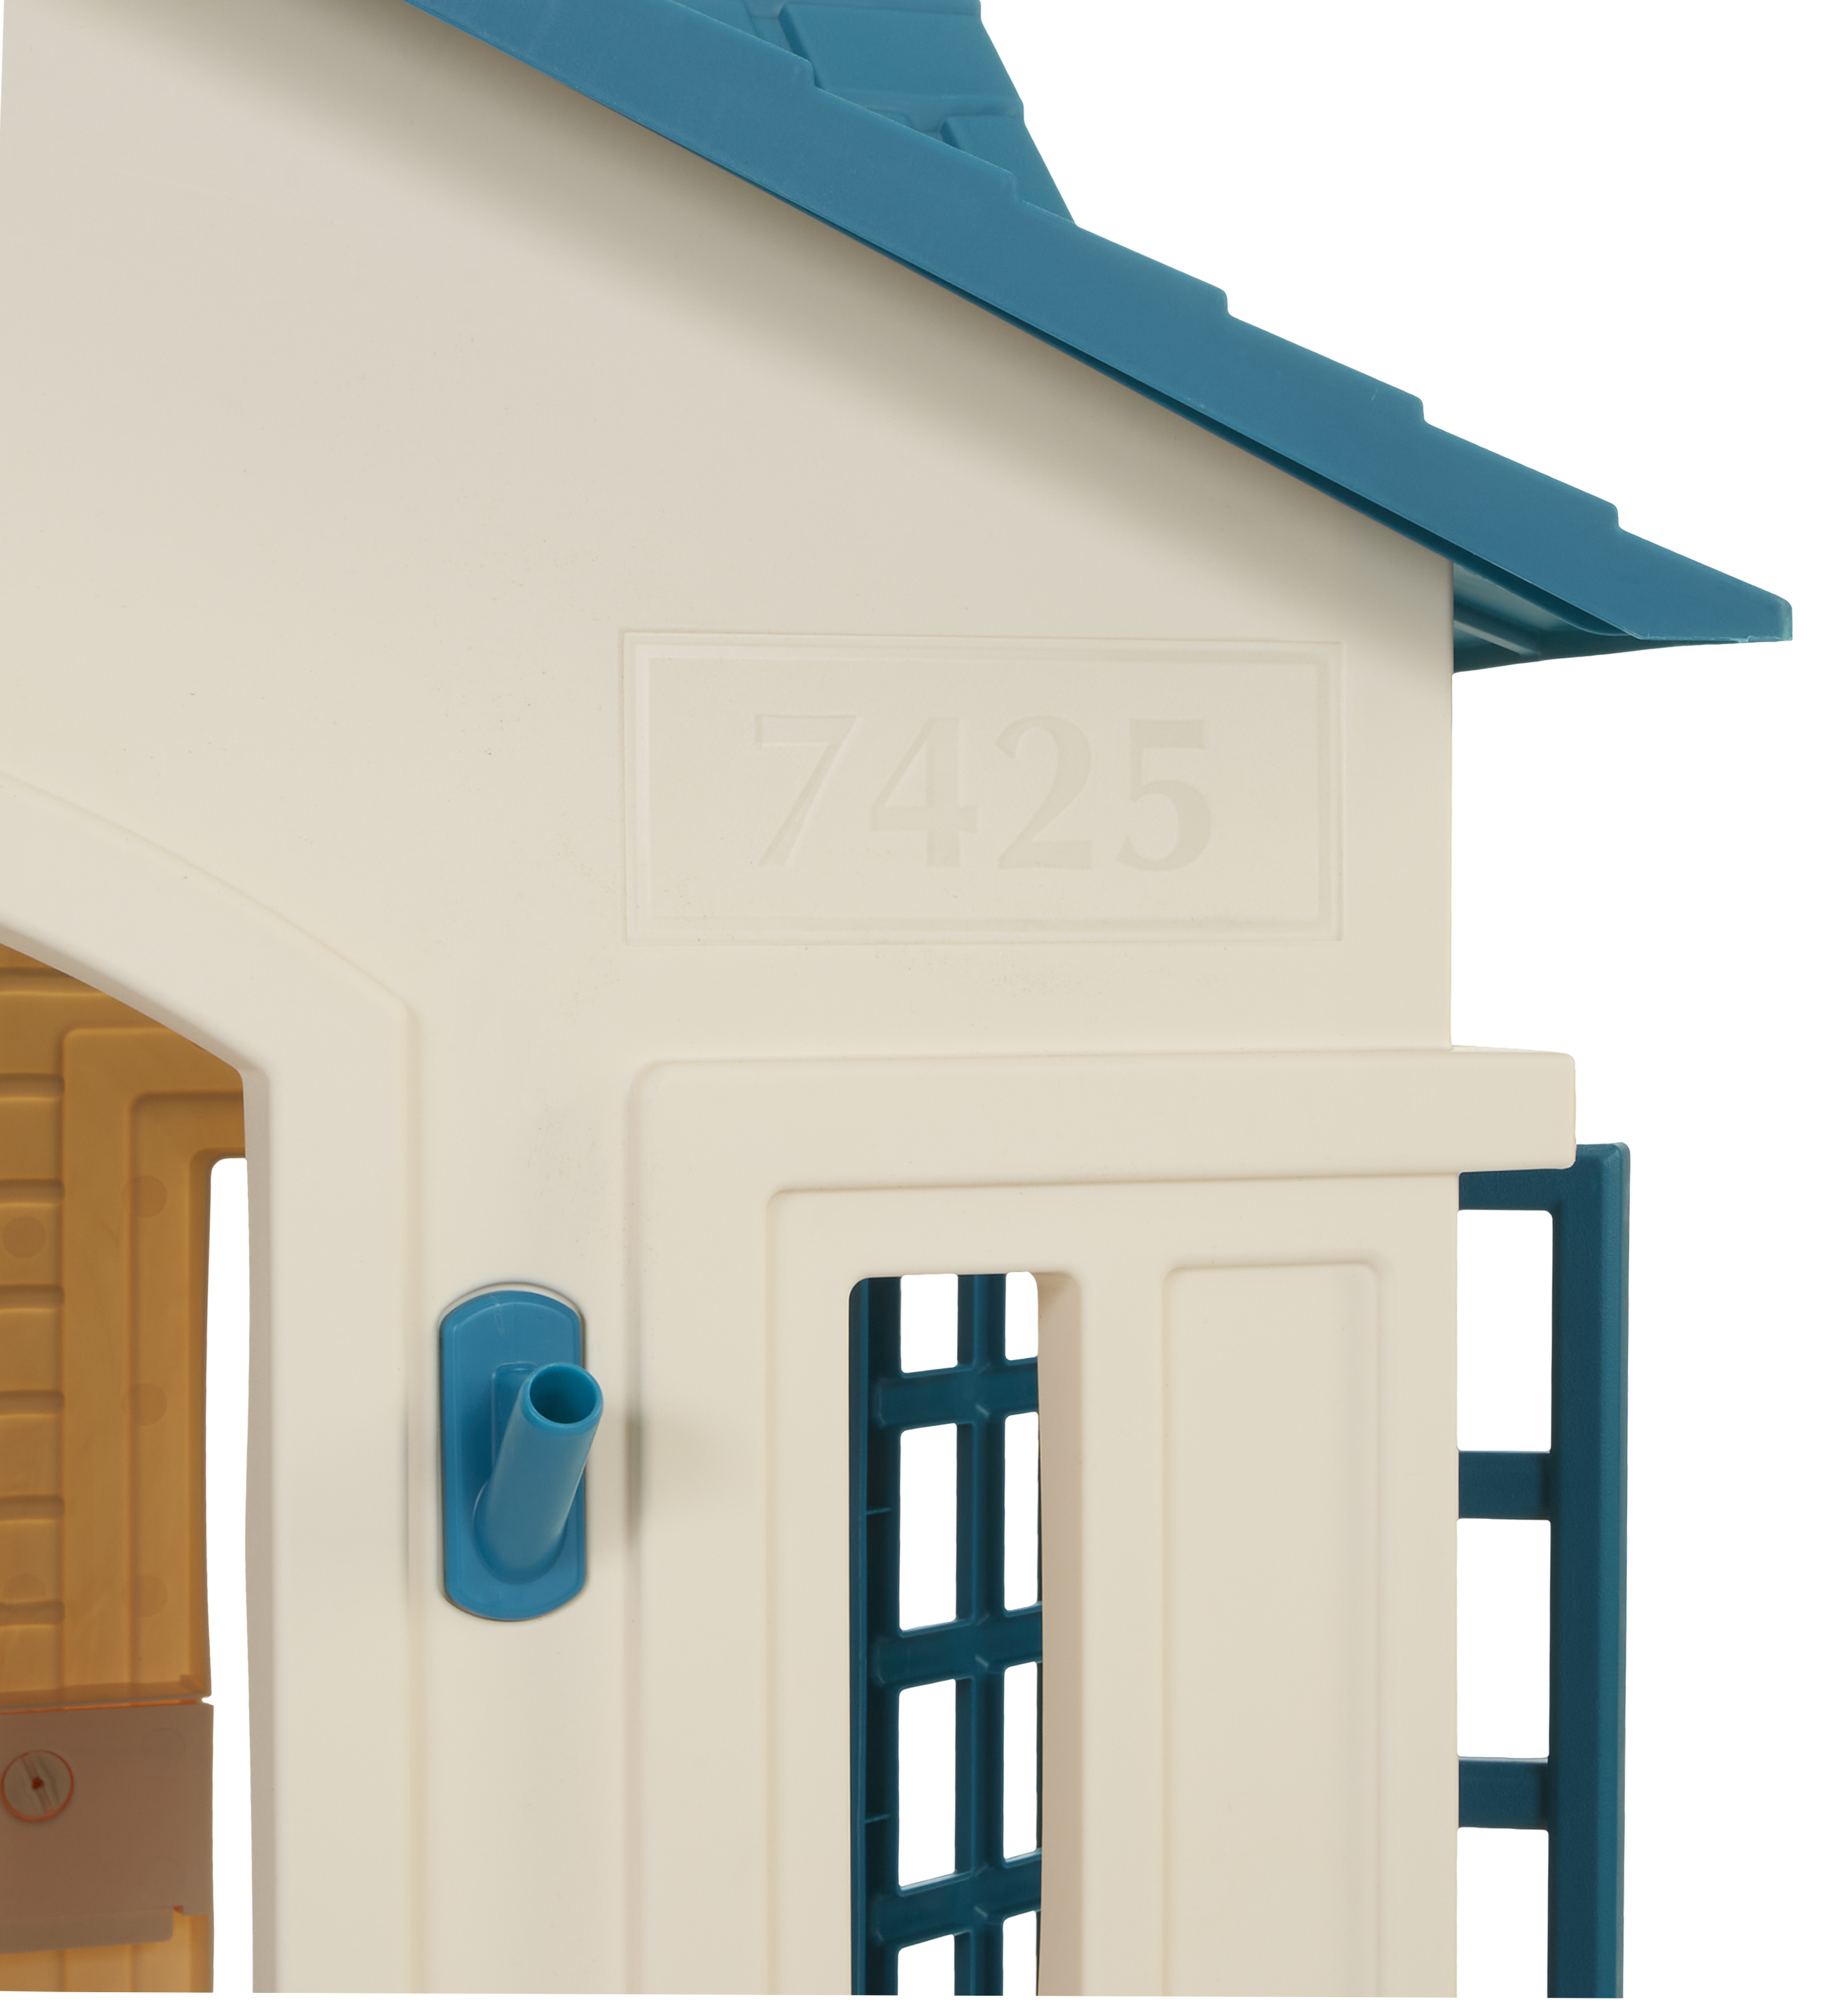 Little Tikes Cape Cottage Pretend Playhouse for Kids, Indoor Outdoor, with Working Door and Windows, for Toddlers Ages 2+ Years, Blue - image 16 of 17